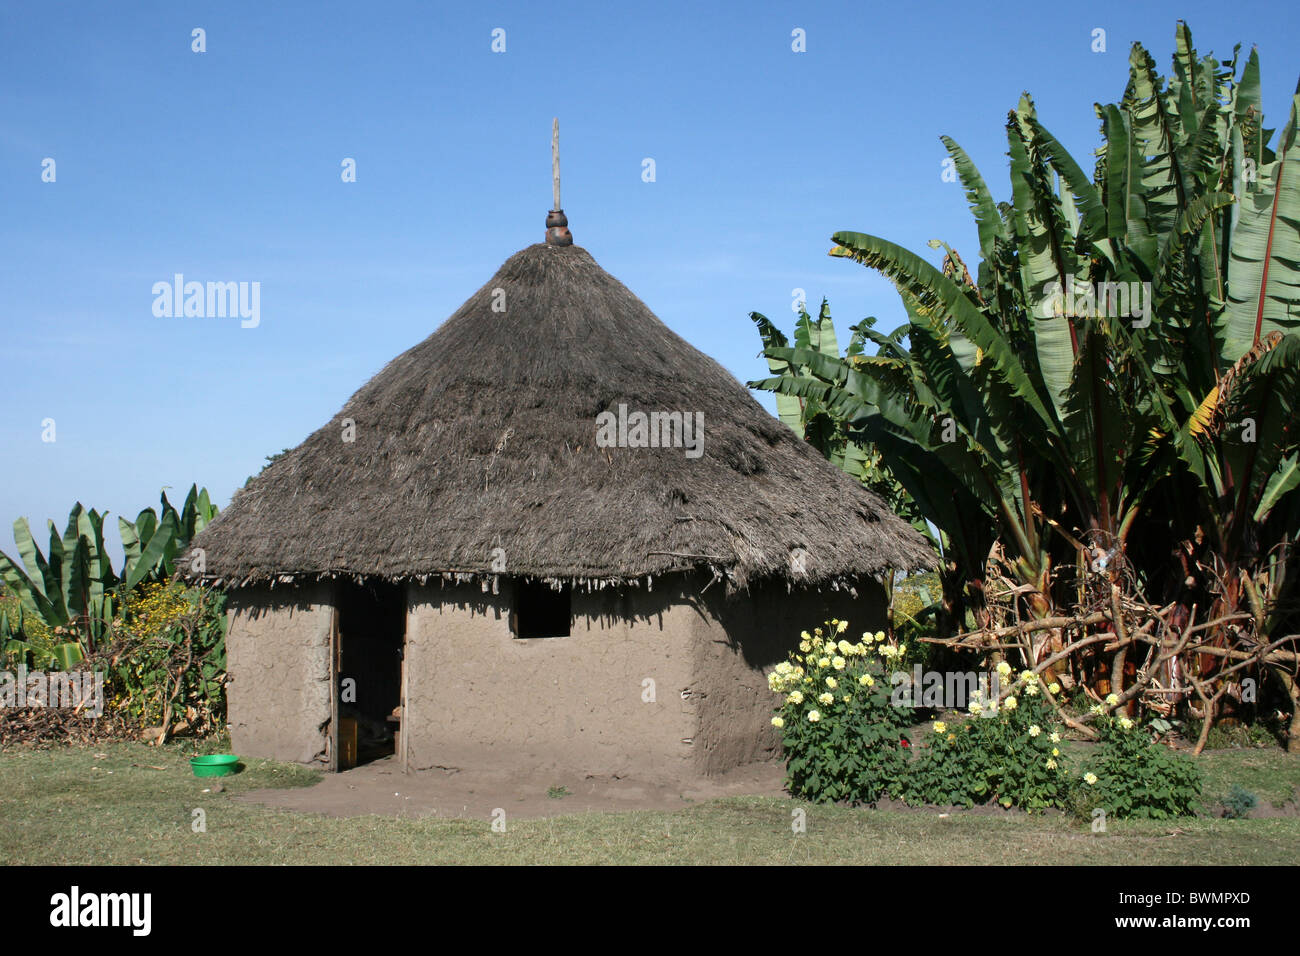 Ethiopian Thatched Mud House Stock Photo